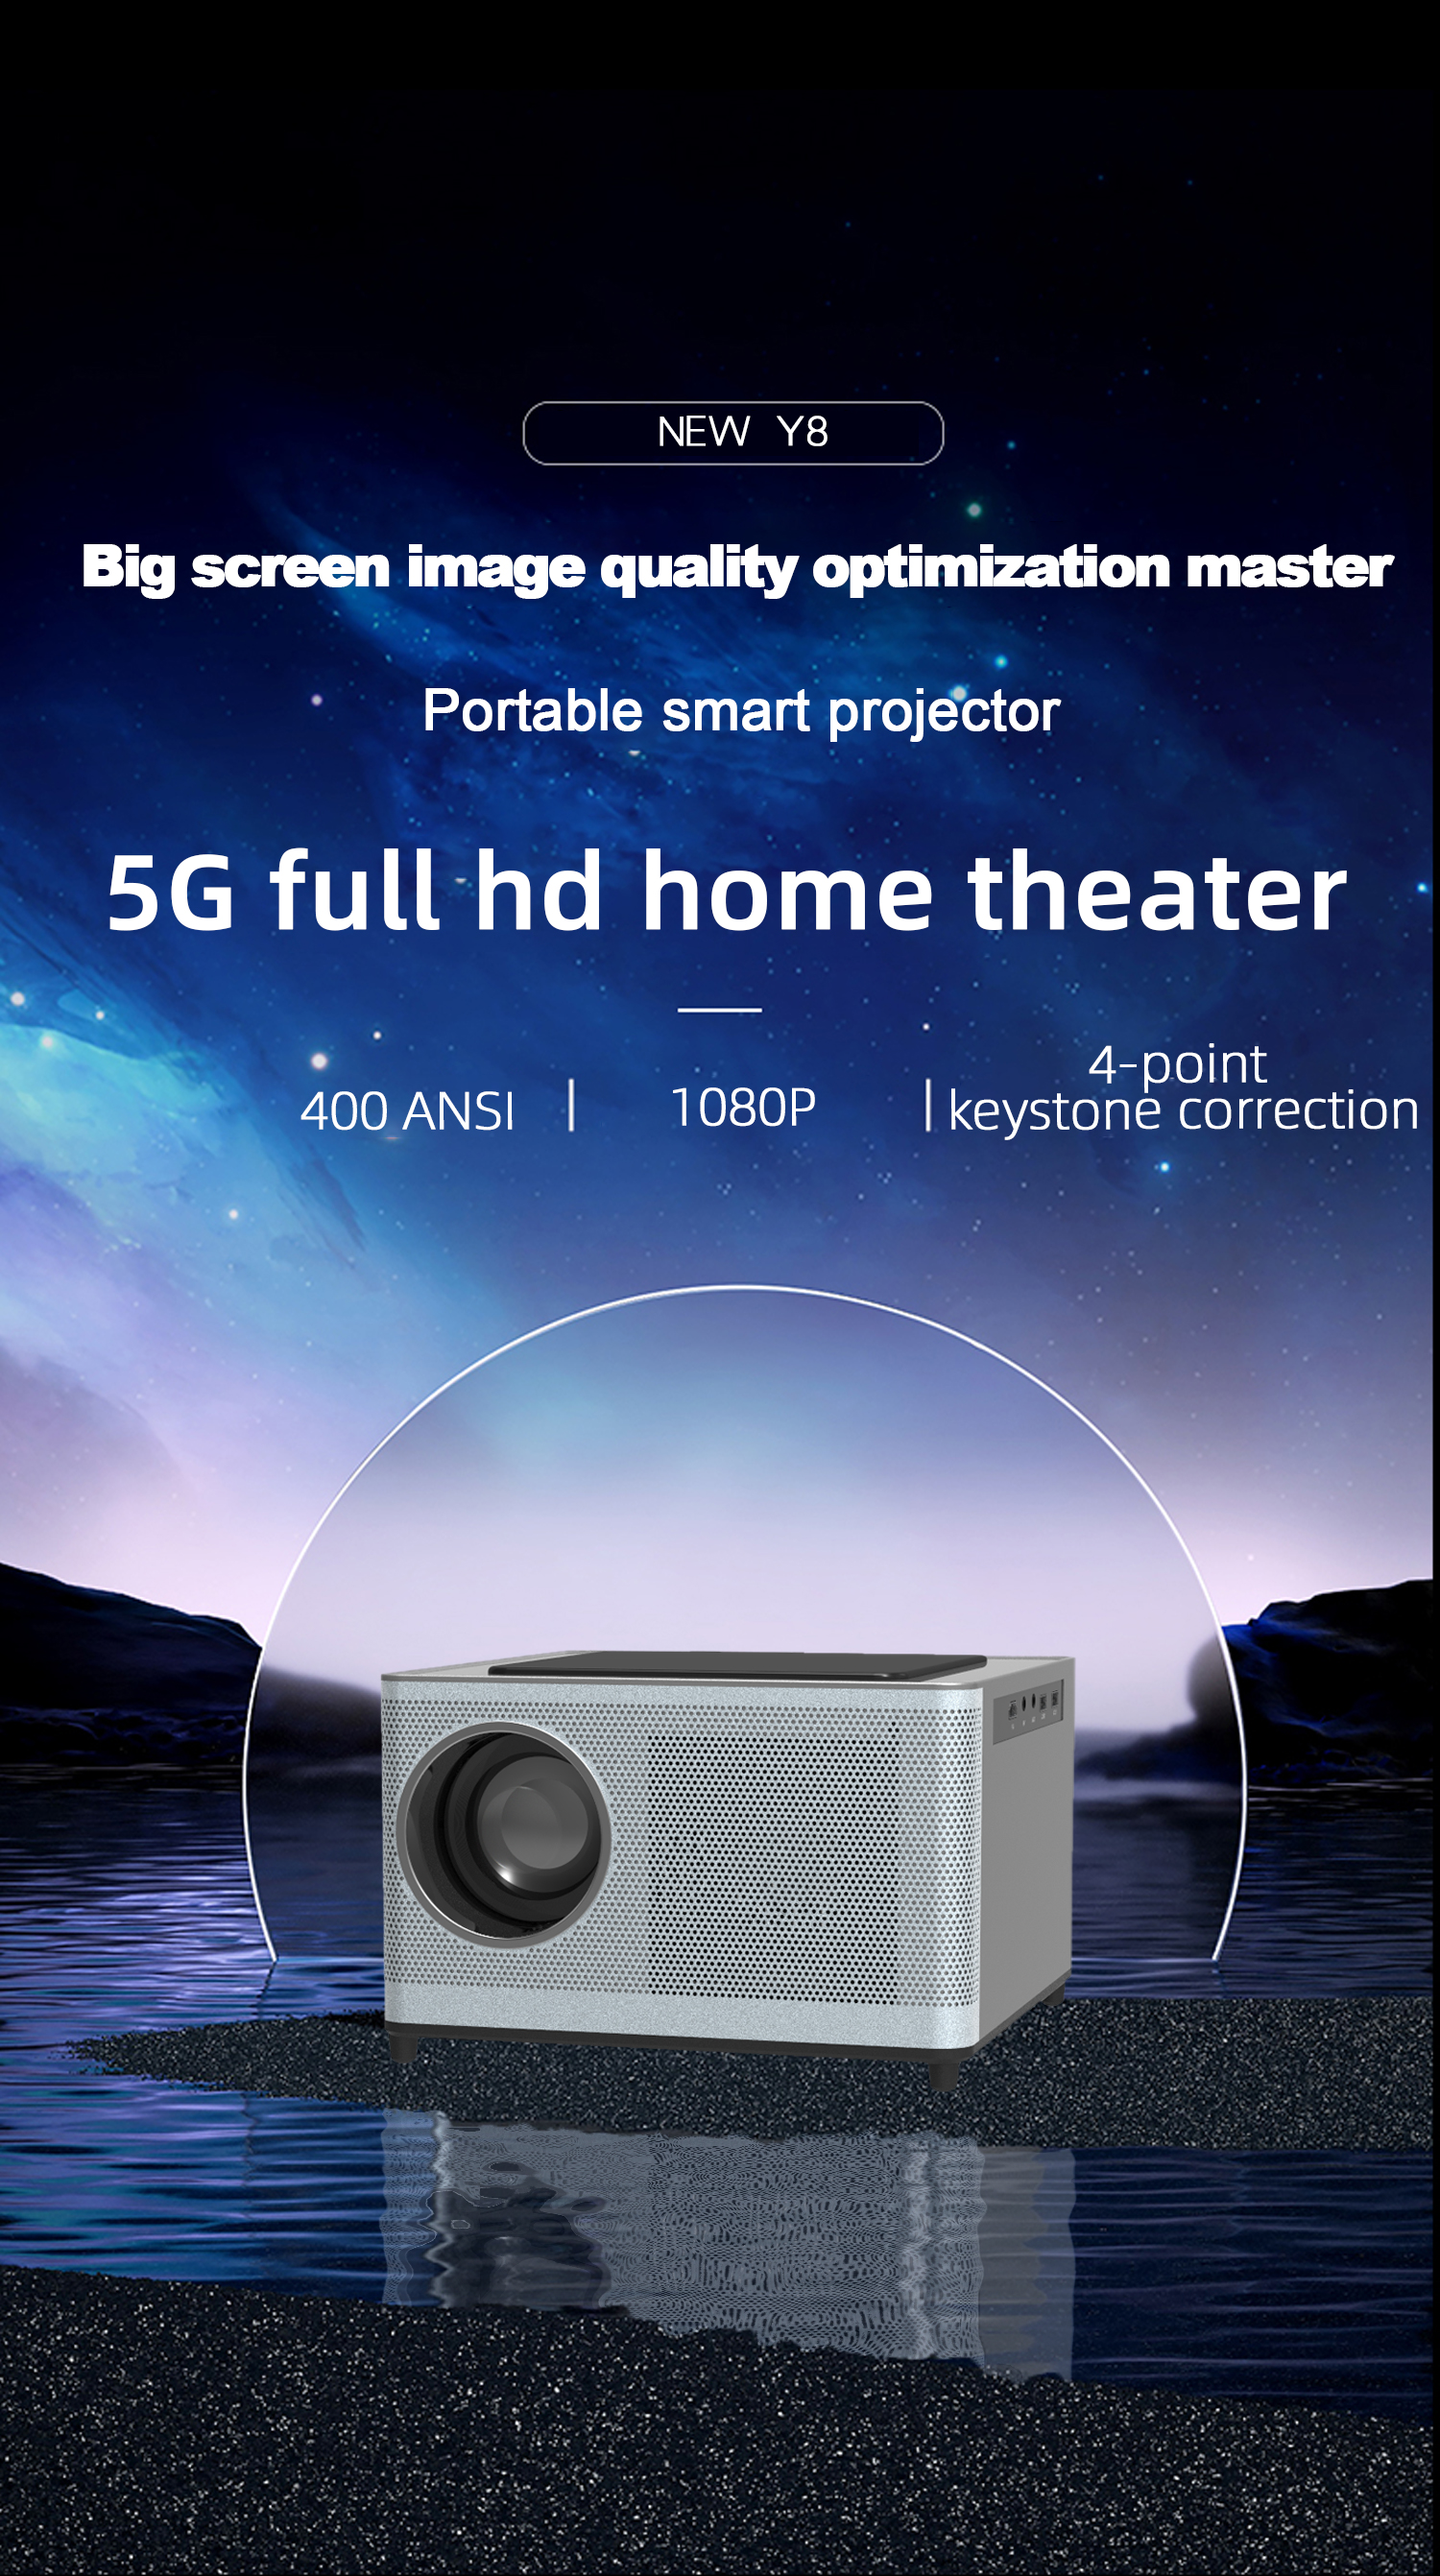 Y8-5G-WIFI-Projector-1080P-Resolution-400ANSI-Lumens-445quot-WIFI-Cast-Screen-Home-Theater-EU-Plug-1972111-1